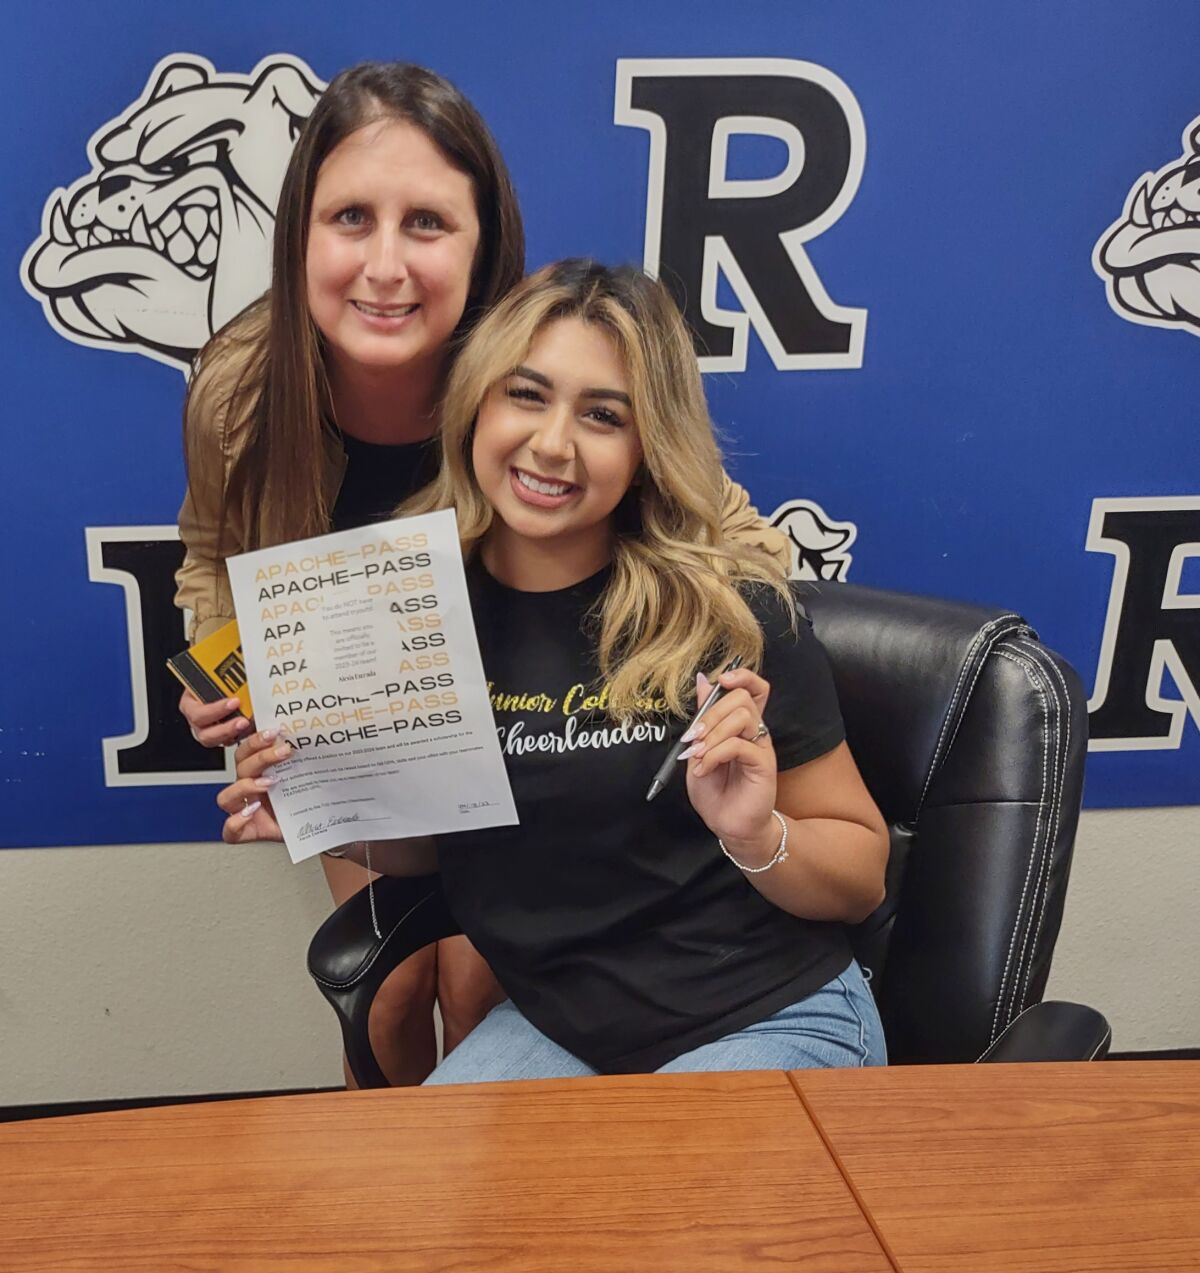 Alexis “Lexi” Estrada signs a pledge to cheer for the TJC Apaches Cheer Team with support from her mom, Christina Ocampo.